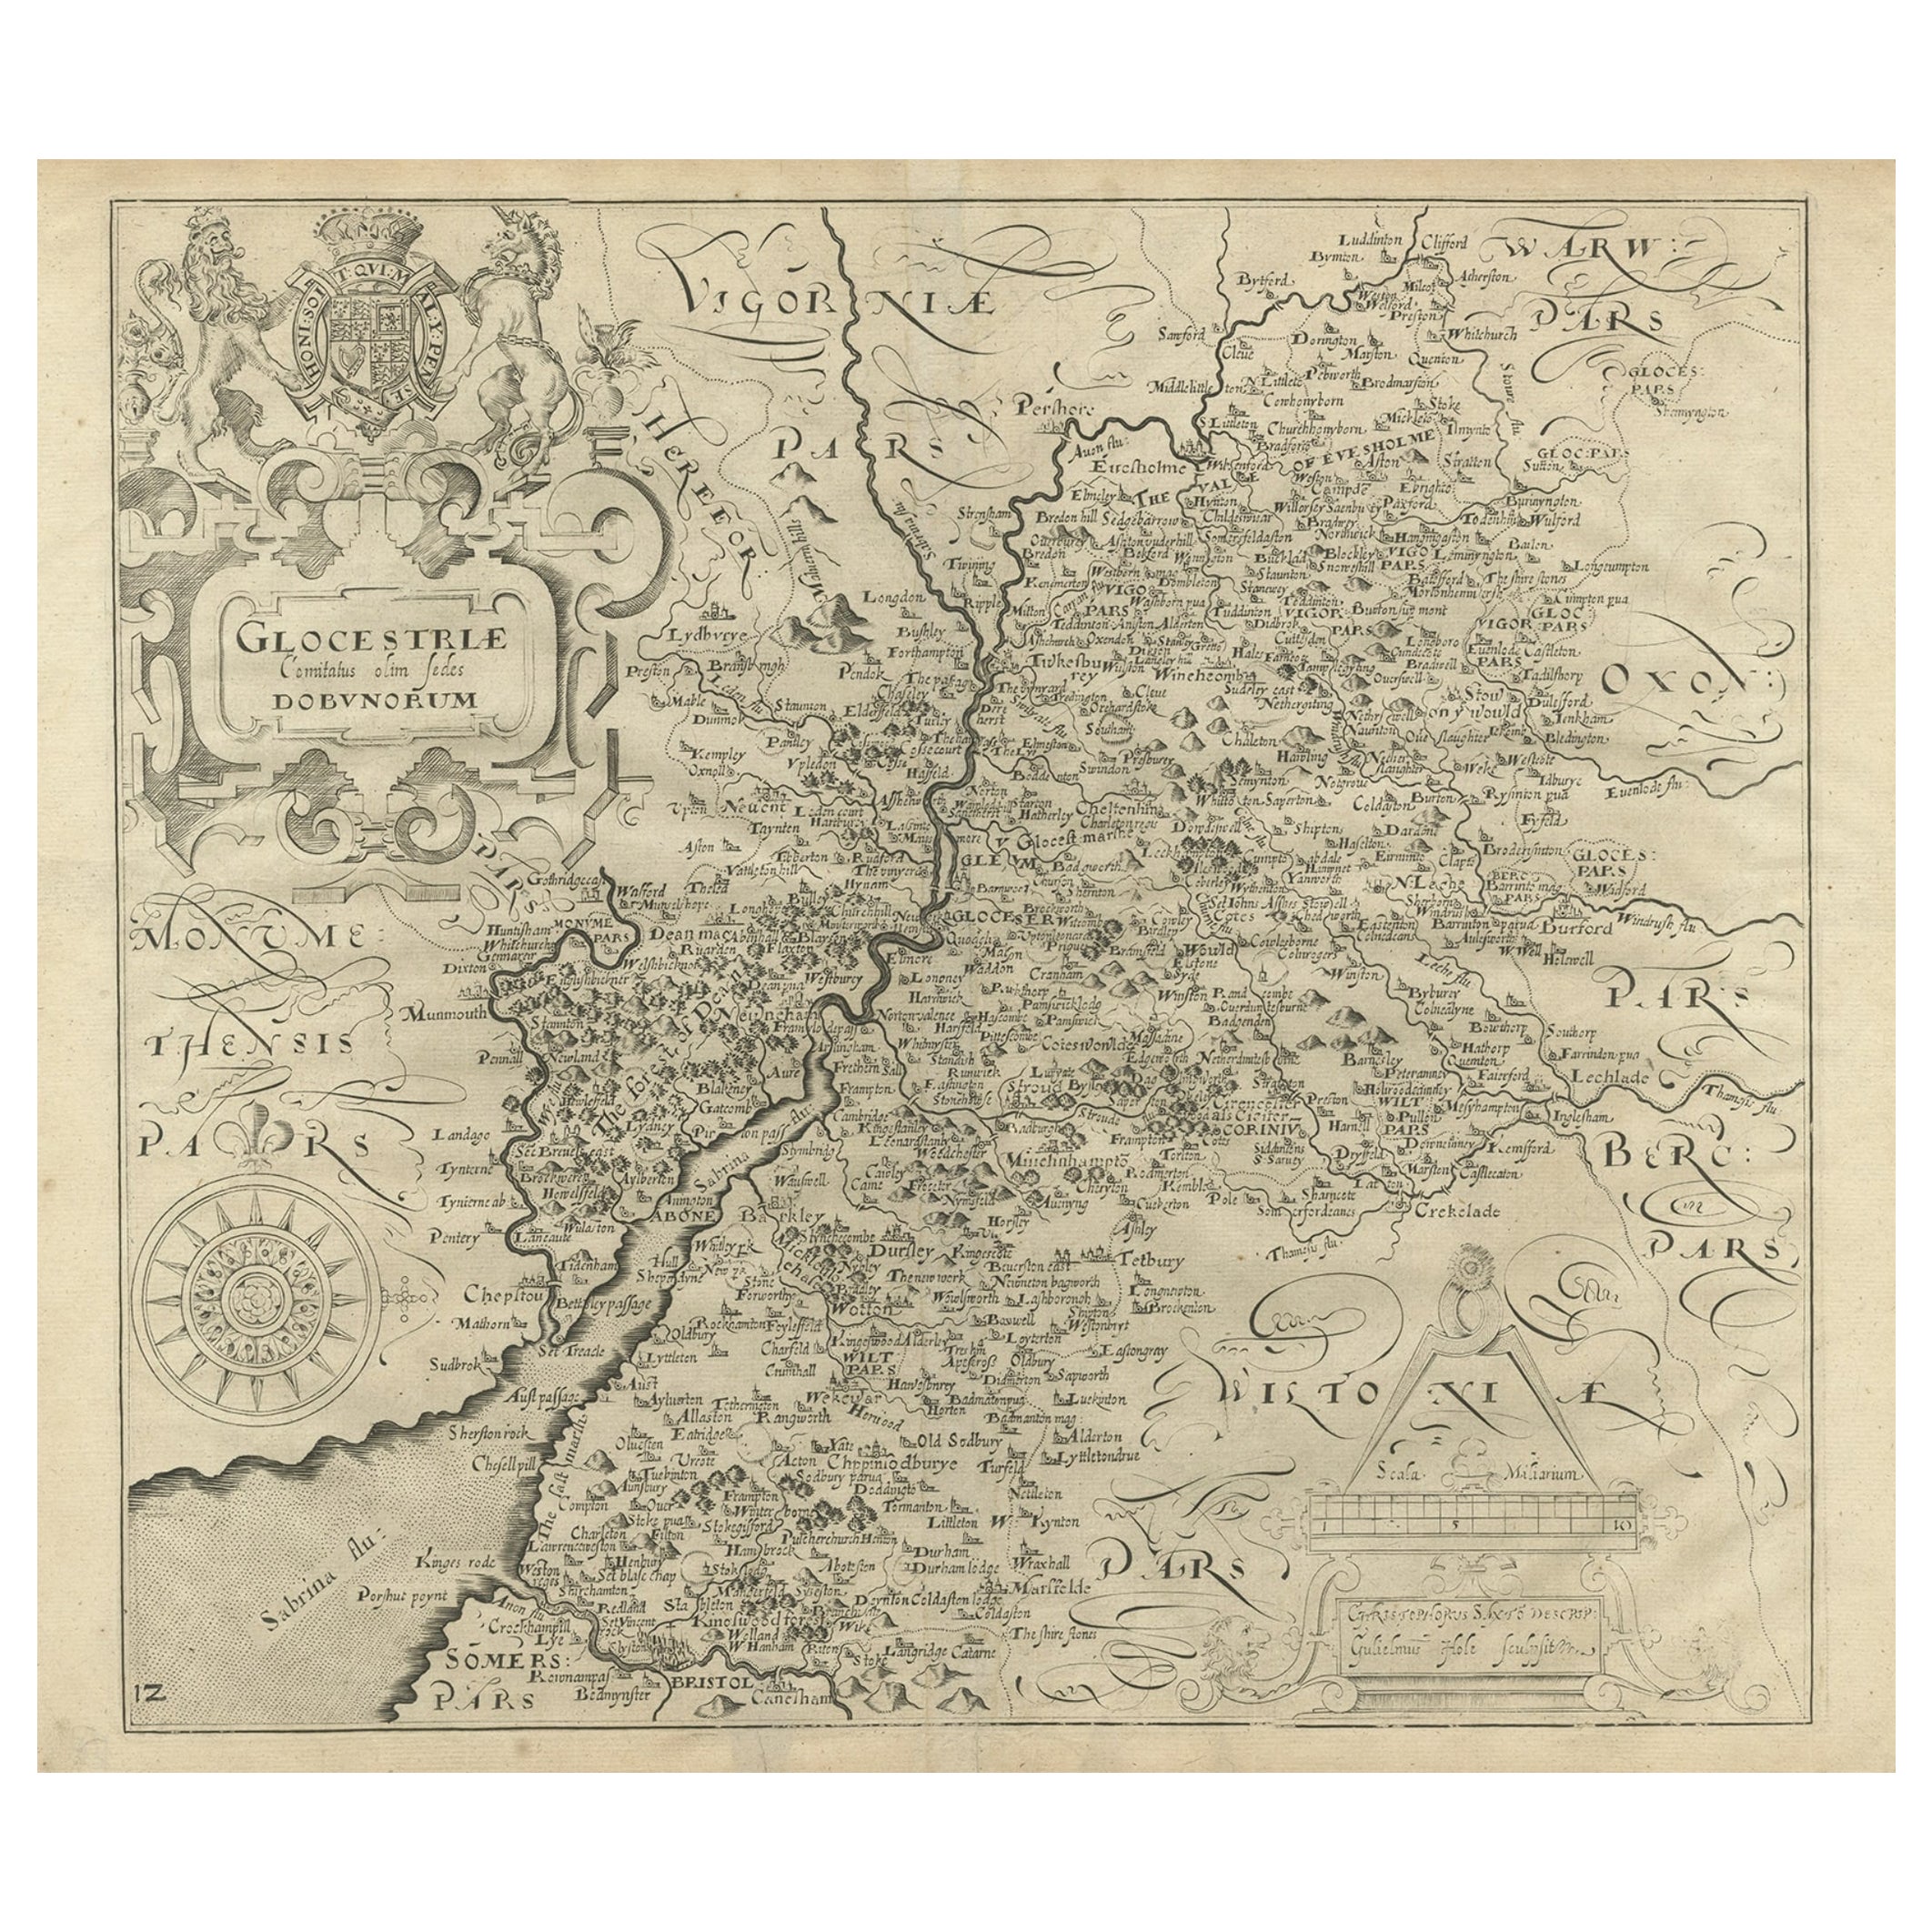 Antique Map of Gloucestershire in Britain by Camden, 1637